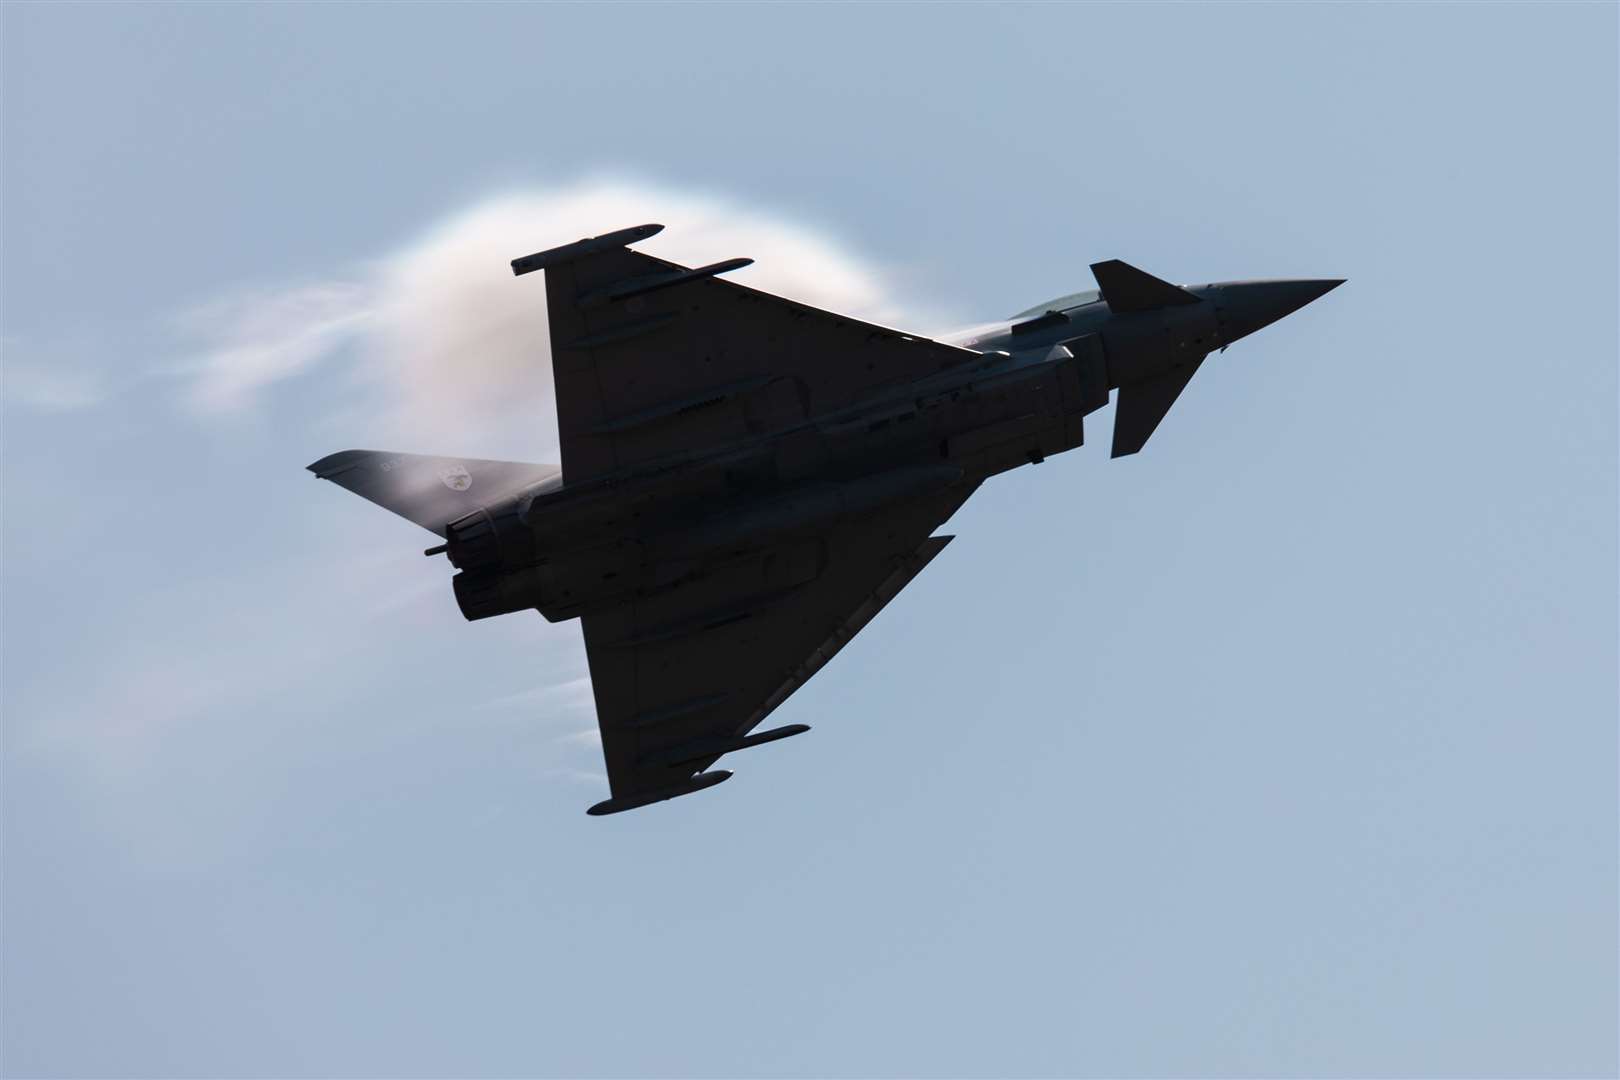 An RAF Typhoon was able to enterain specatators at the show.